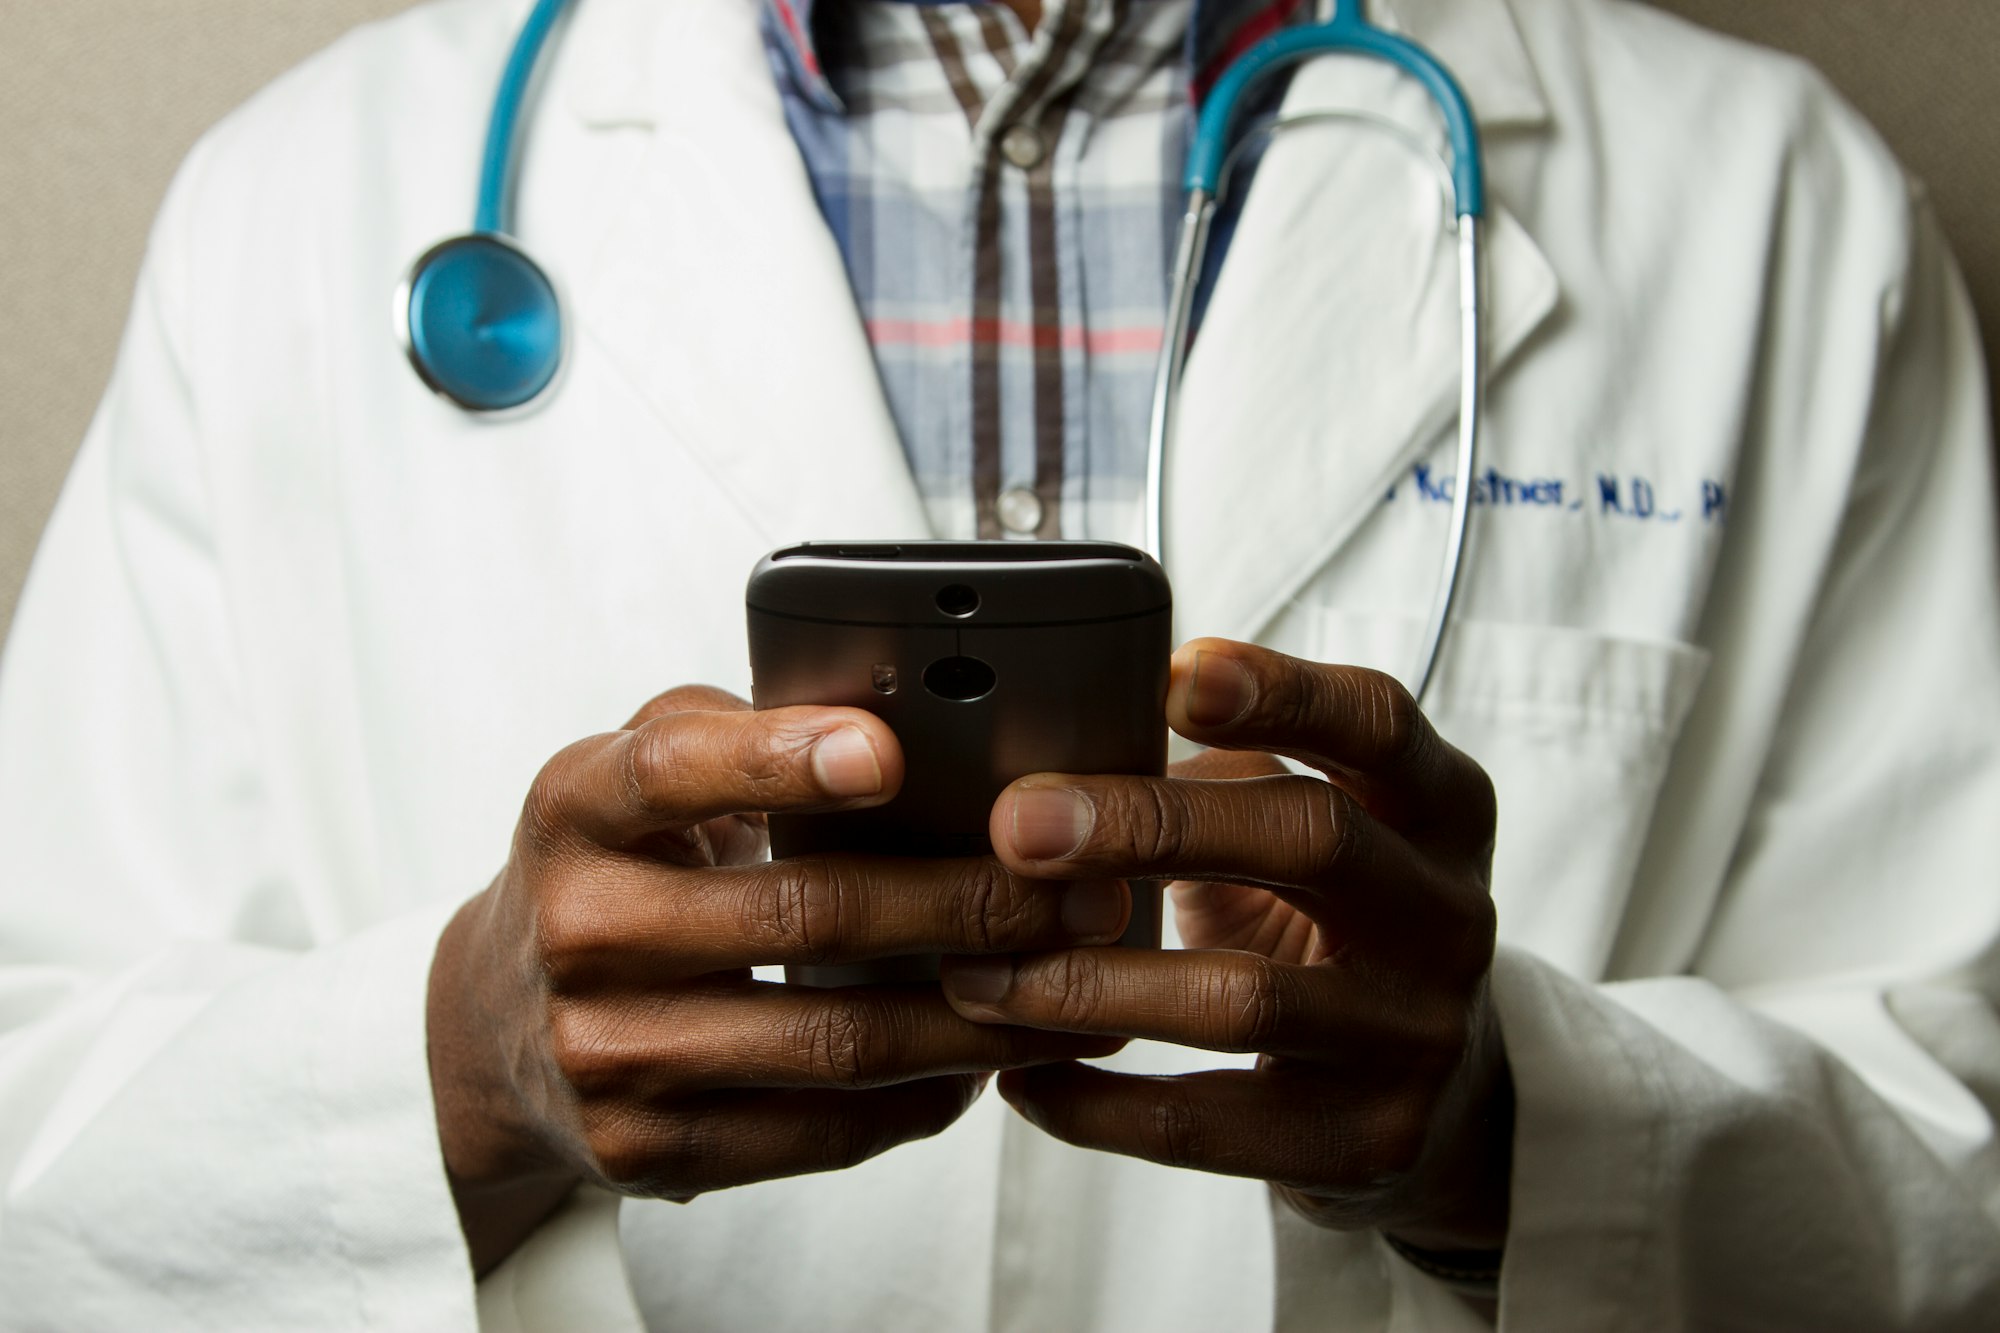 This Tanzania-based company has launched a telemedicine product for students across Africa